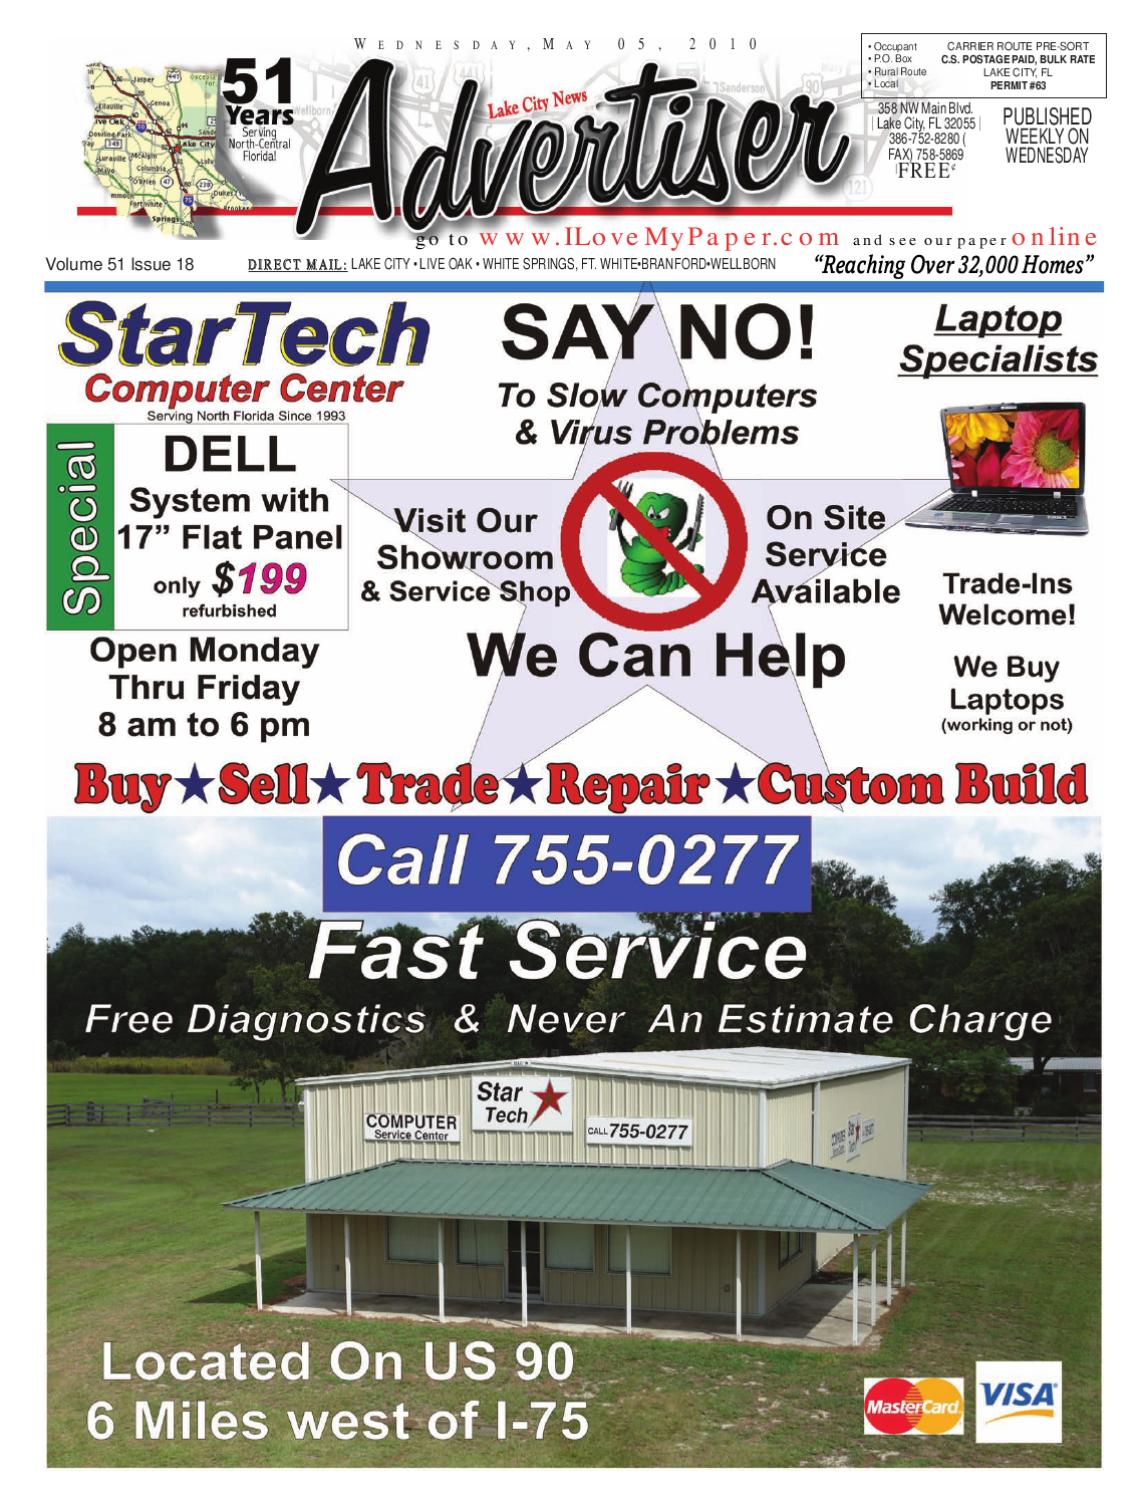 Anniston Fireplace Fresh Newspaper Lake City Advertiser Volume 51 issue 18 by Scbusa